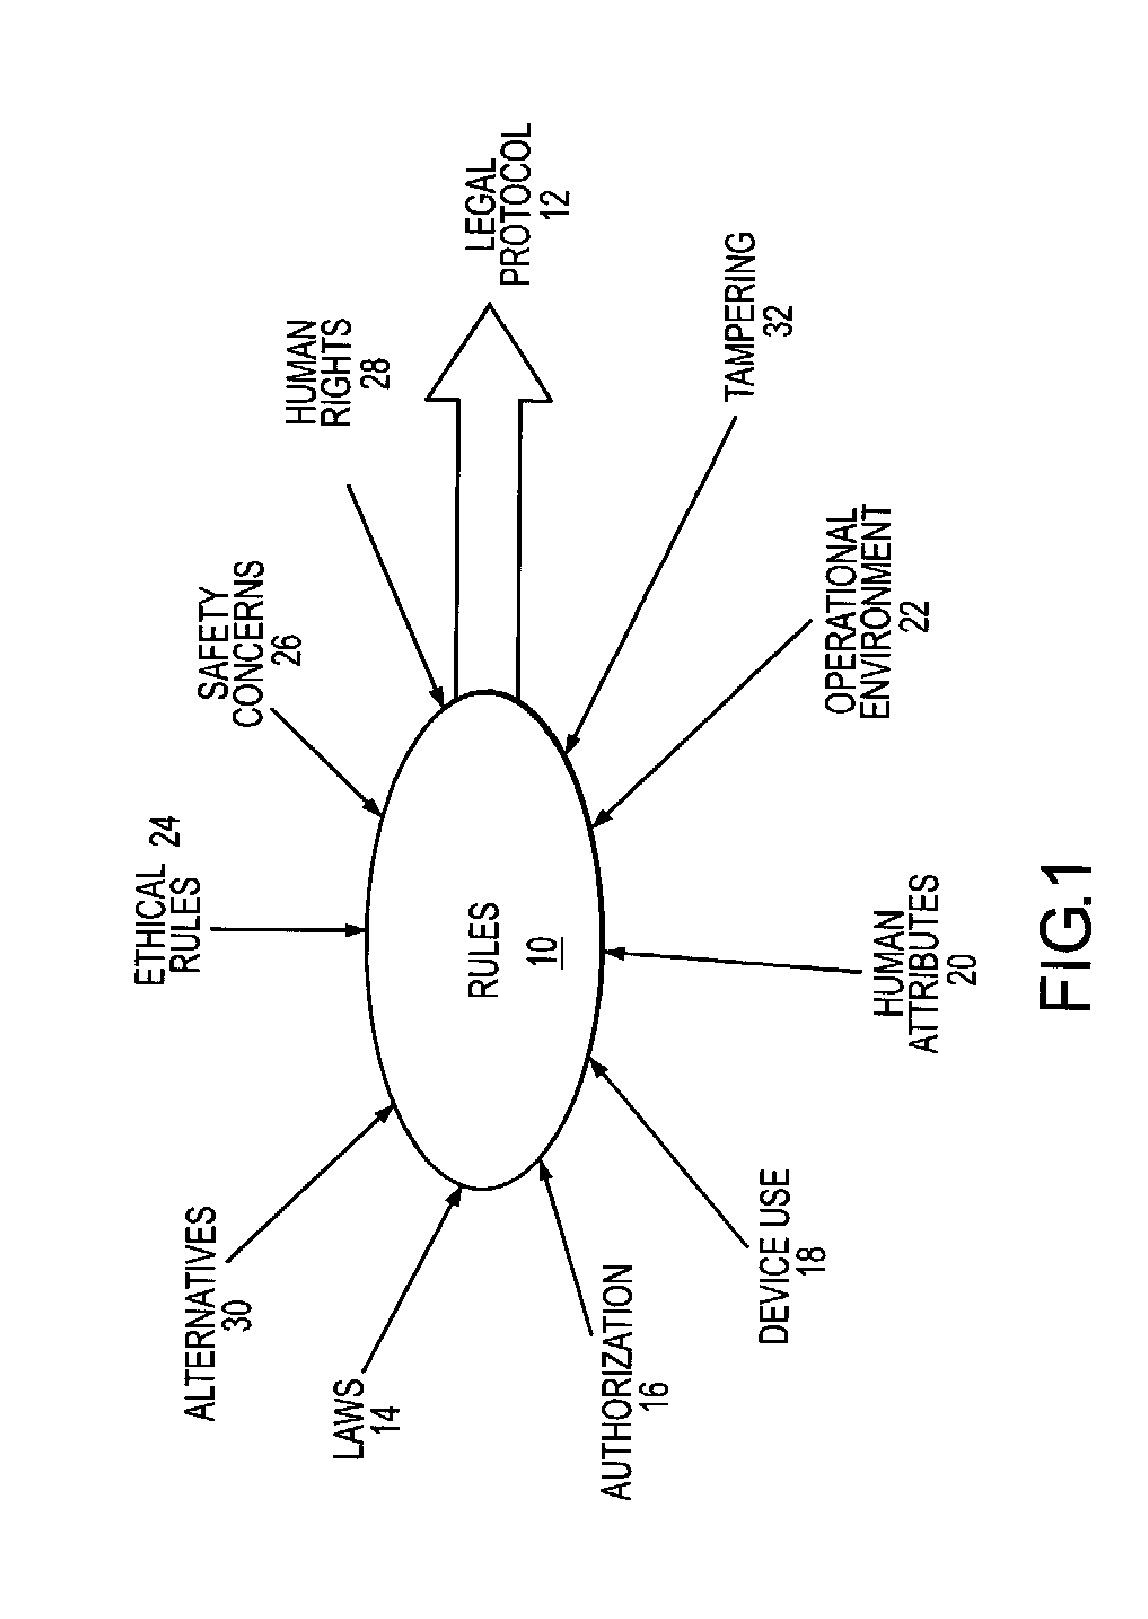 Safeguard System for Ensuring Device Operation in Conformance with Governing Laws